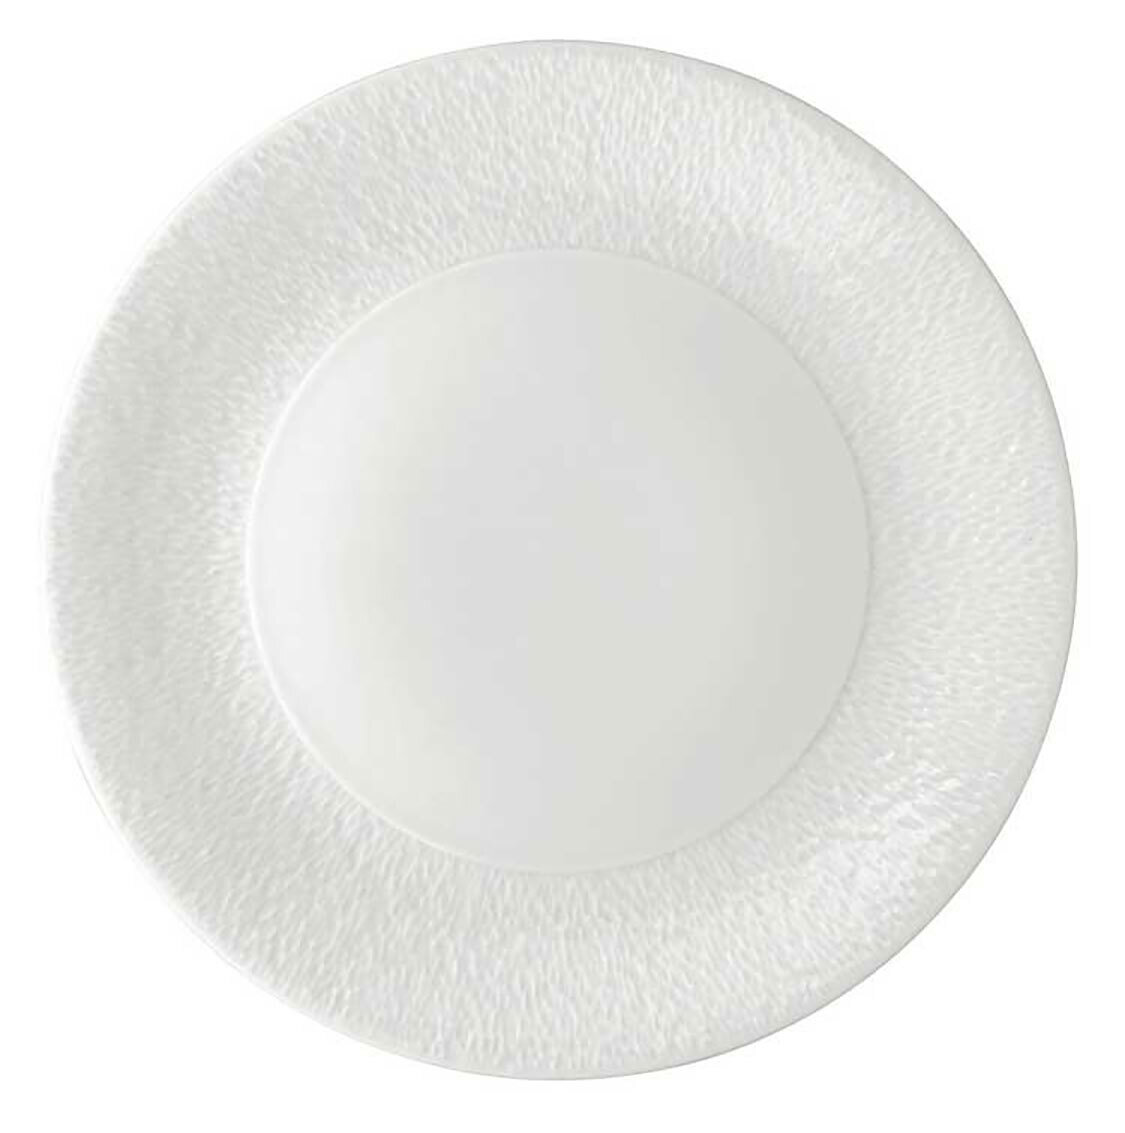 Raynaud Mineral Sable American Dinner Plate 0001-21-113029